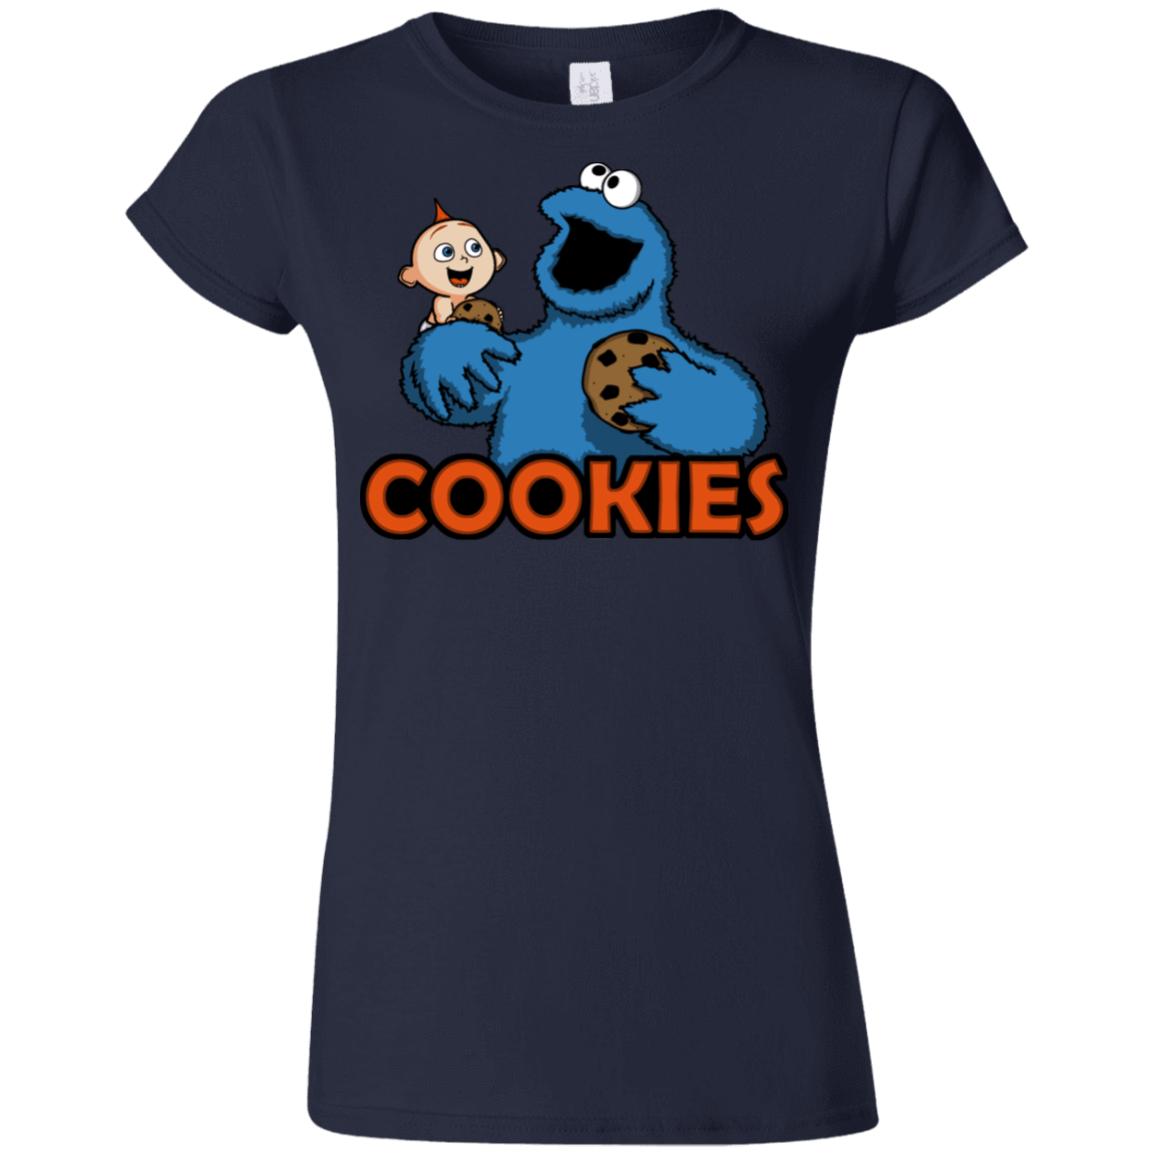 T-Shirts Navy / S Cookies Junior Slimmer-Fit T-Shirt